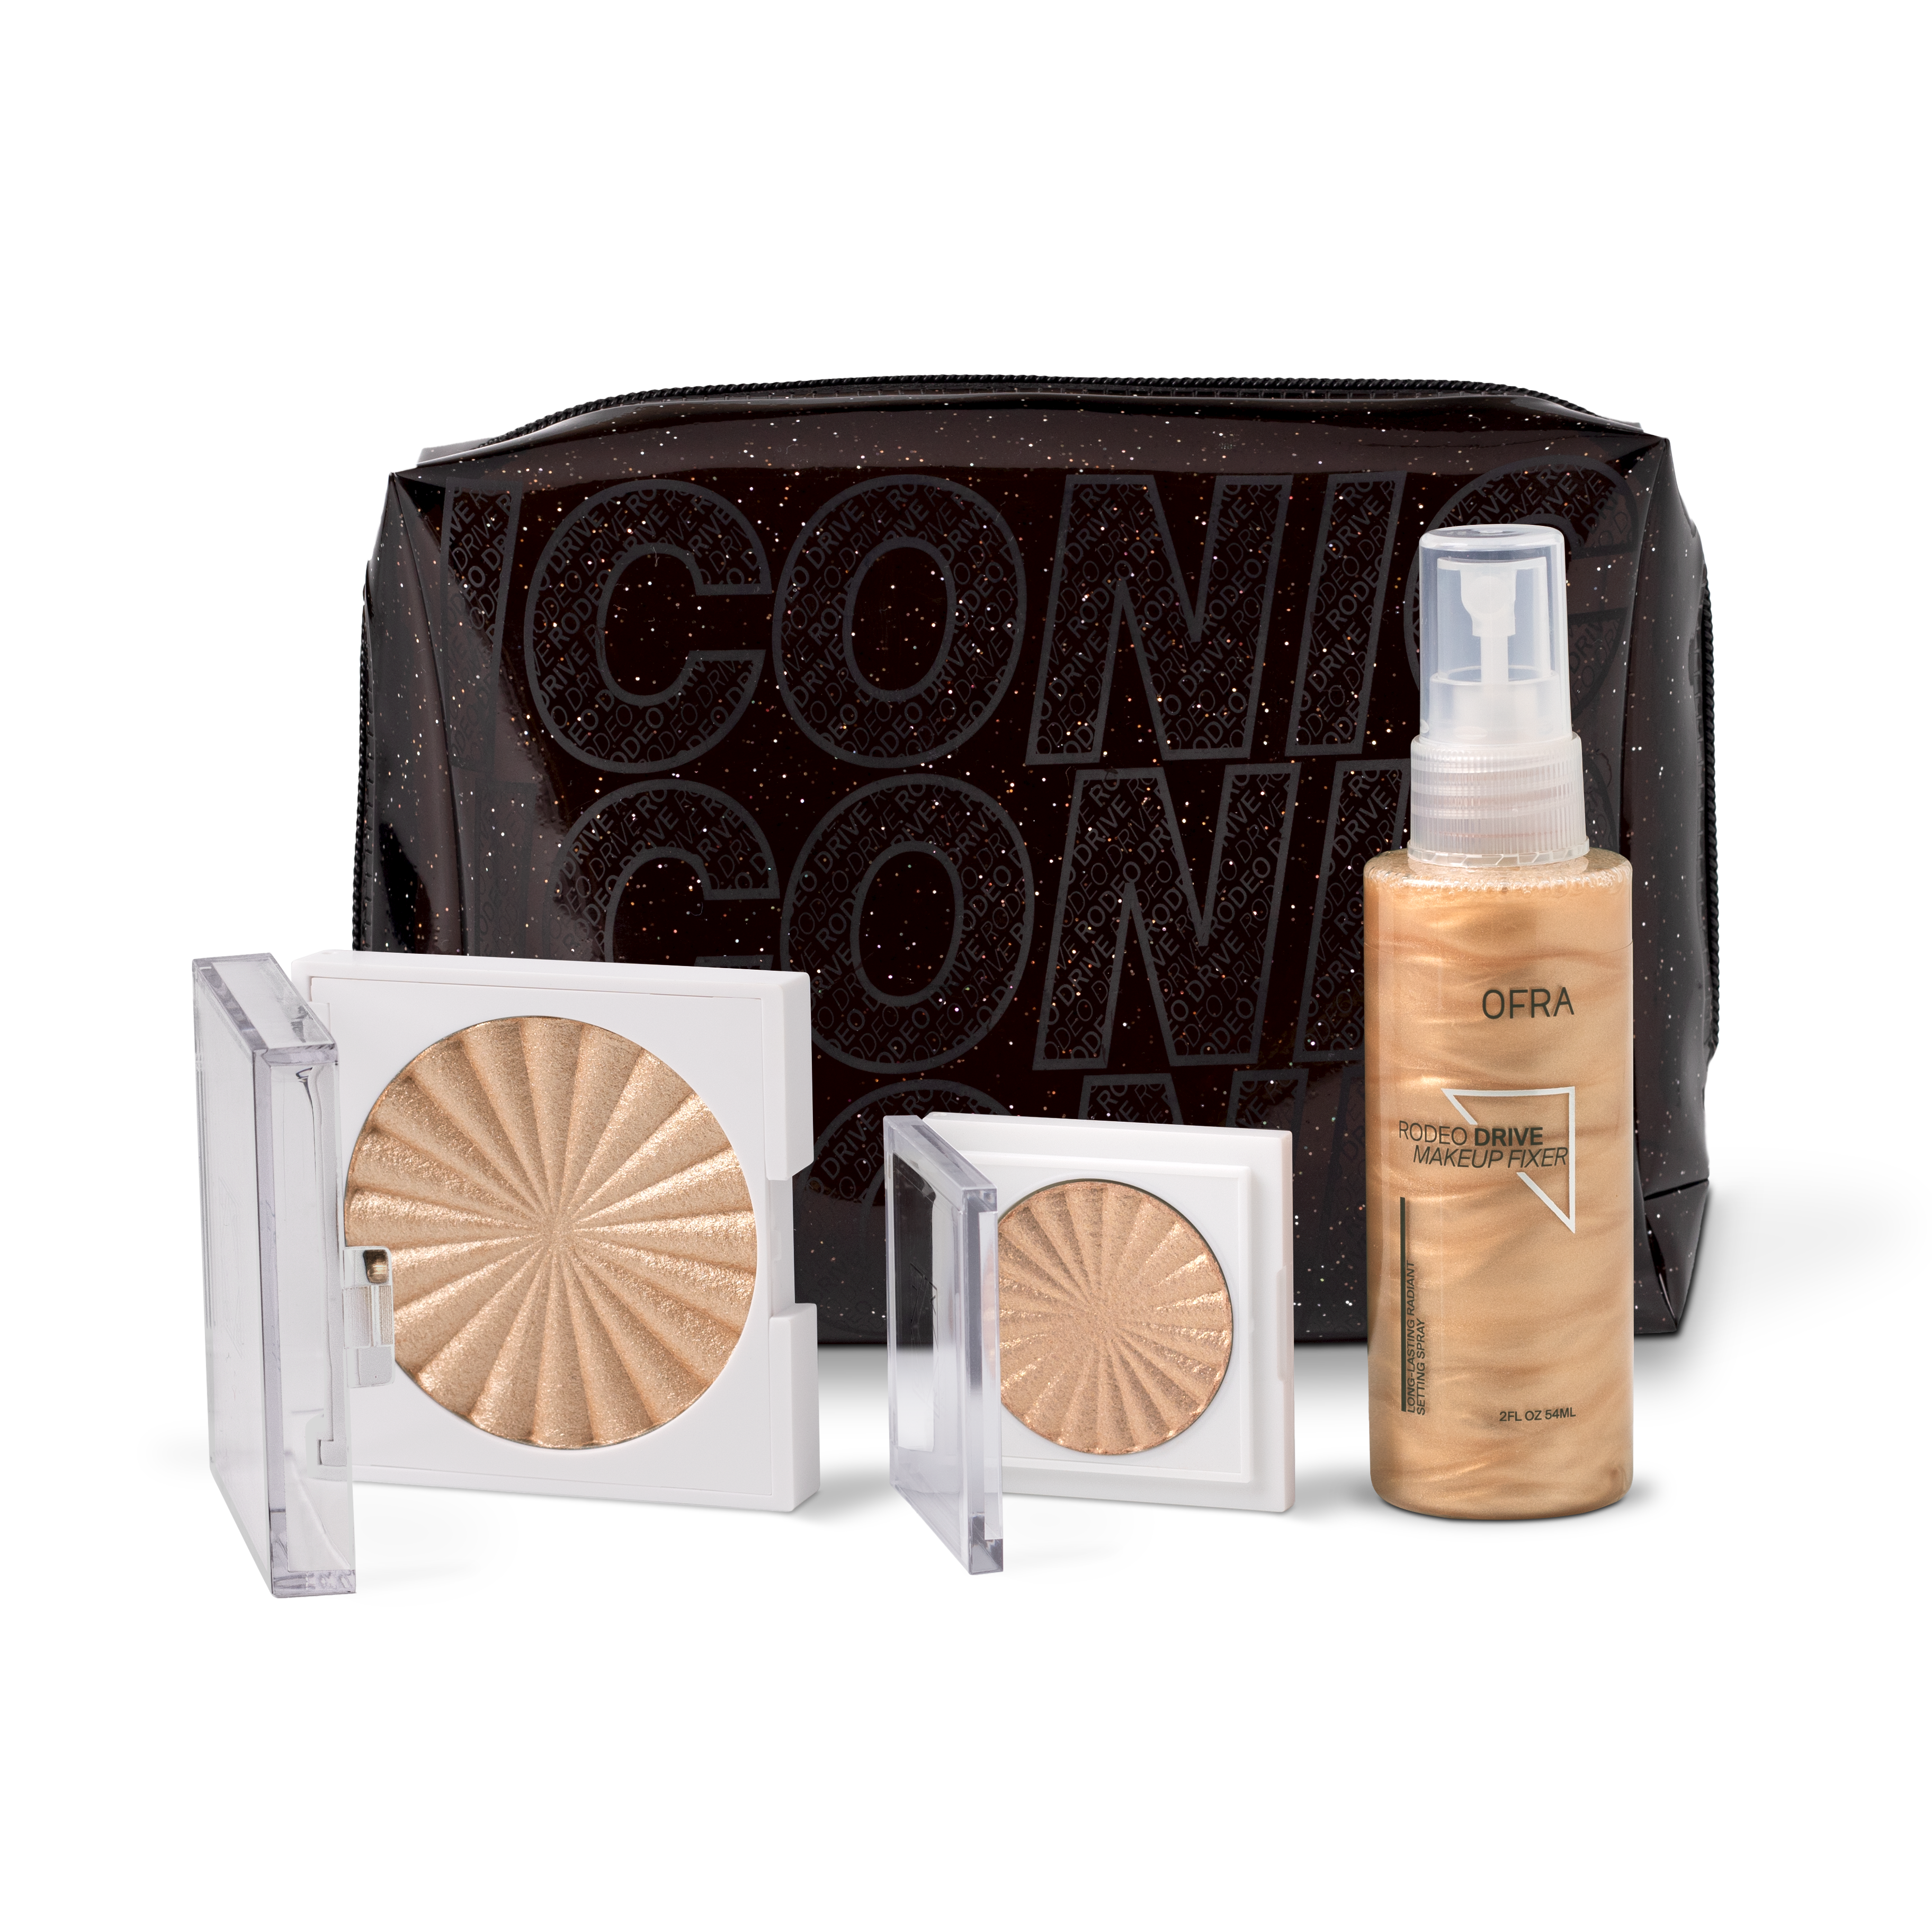 Ofra Cosmetics Iconic Collection - Rodeo Drive | Highlighter Makeup Bundle | Vegan & Cruelty-Free Makeup